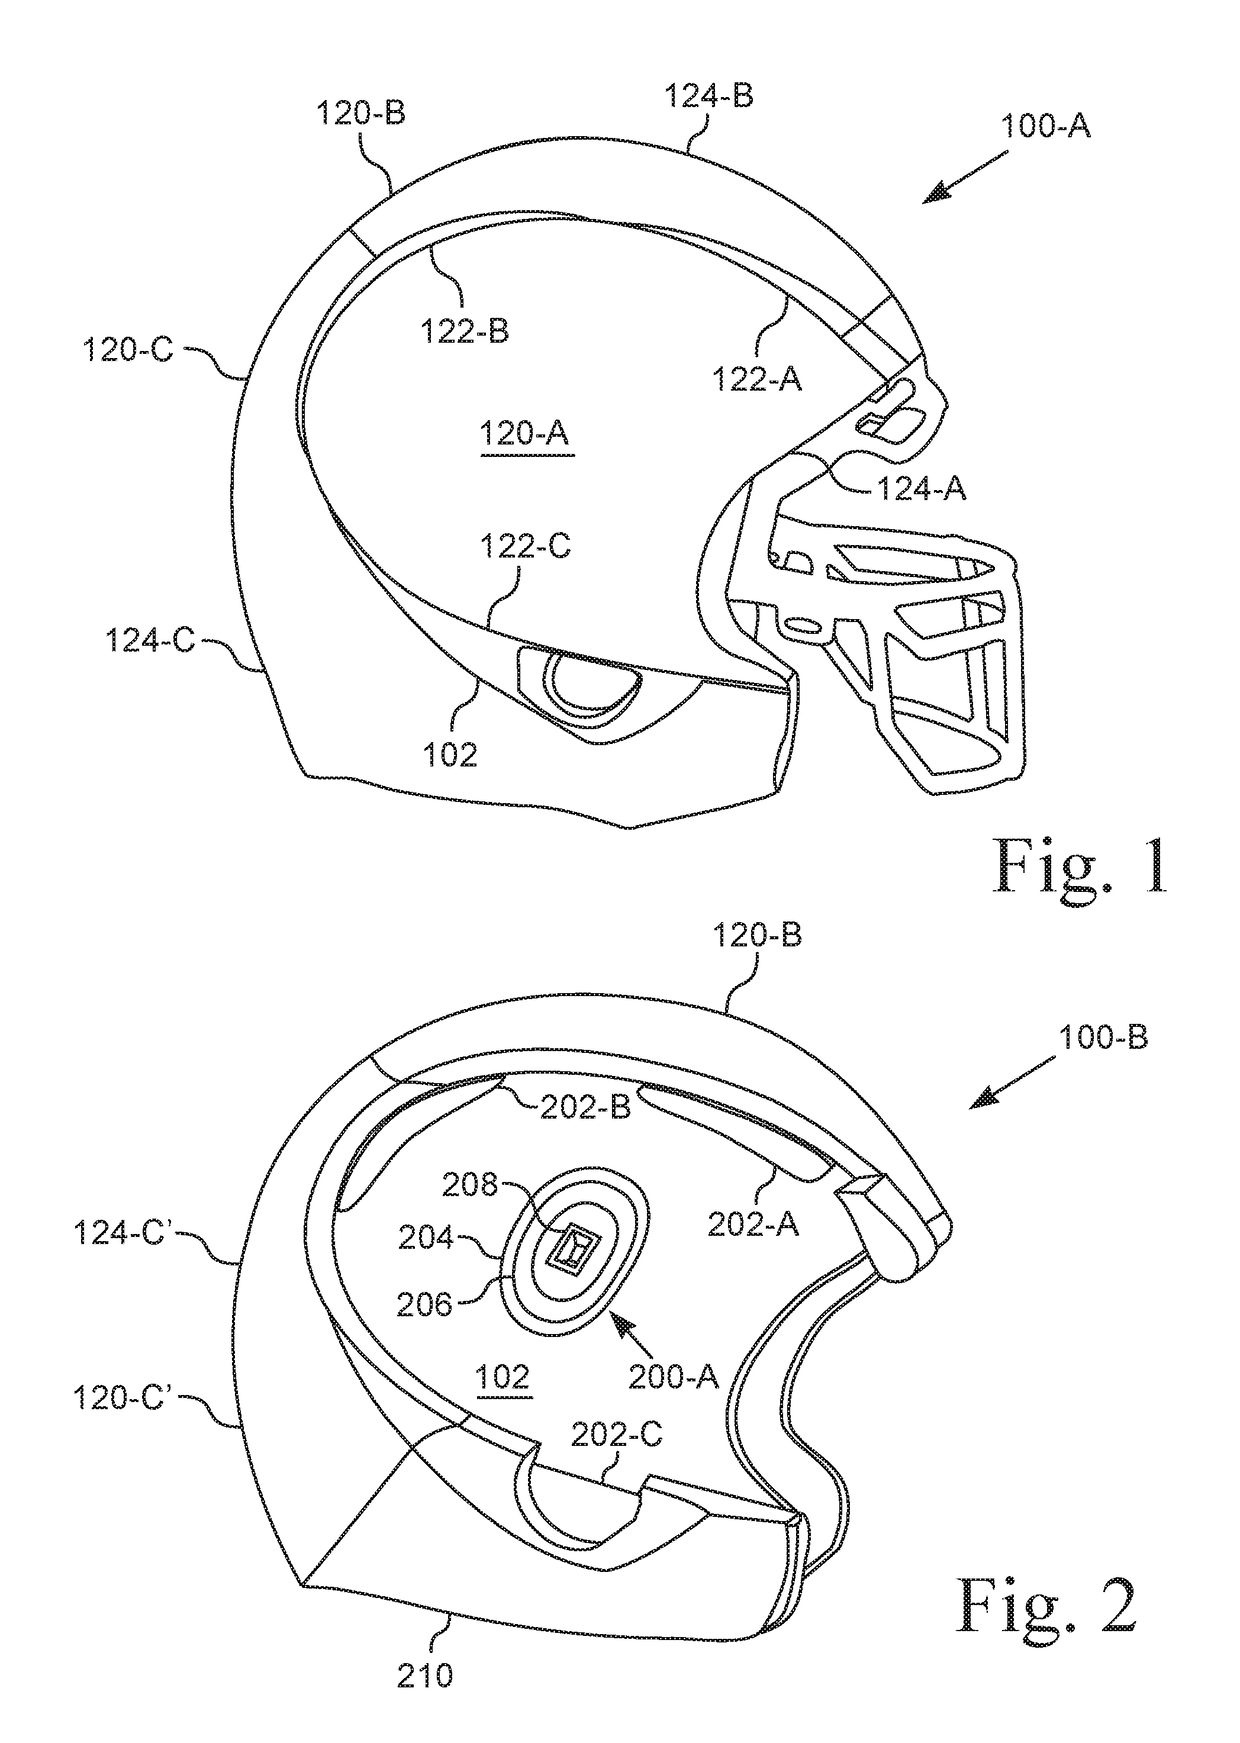 Helmet for tangential and direct impacts